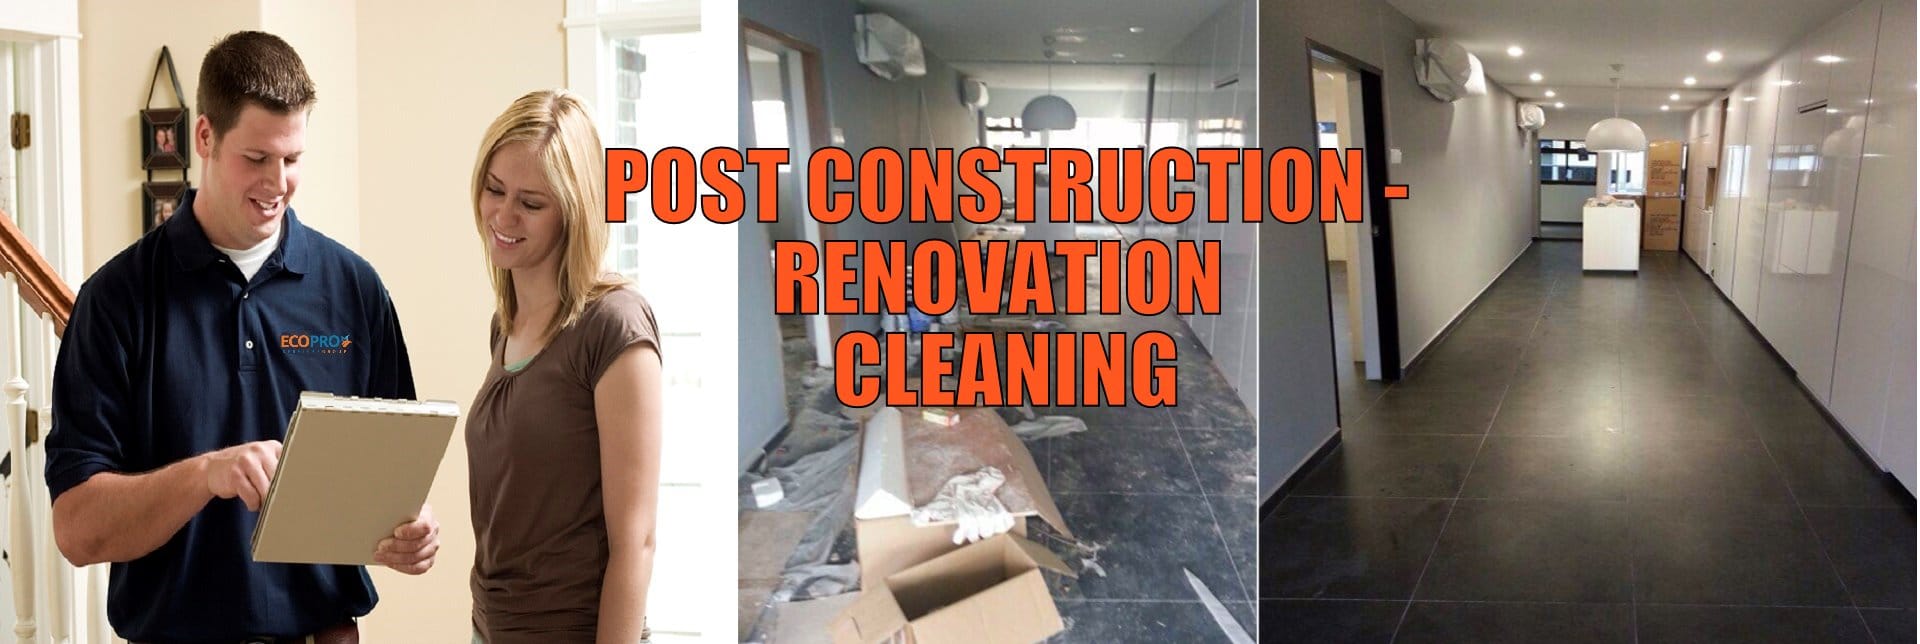 Post Construction cleanup ottawa